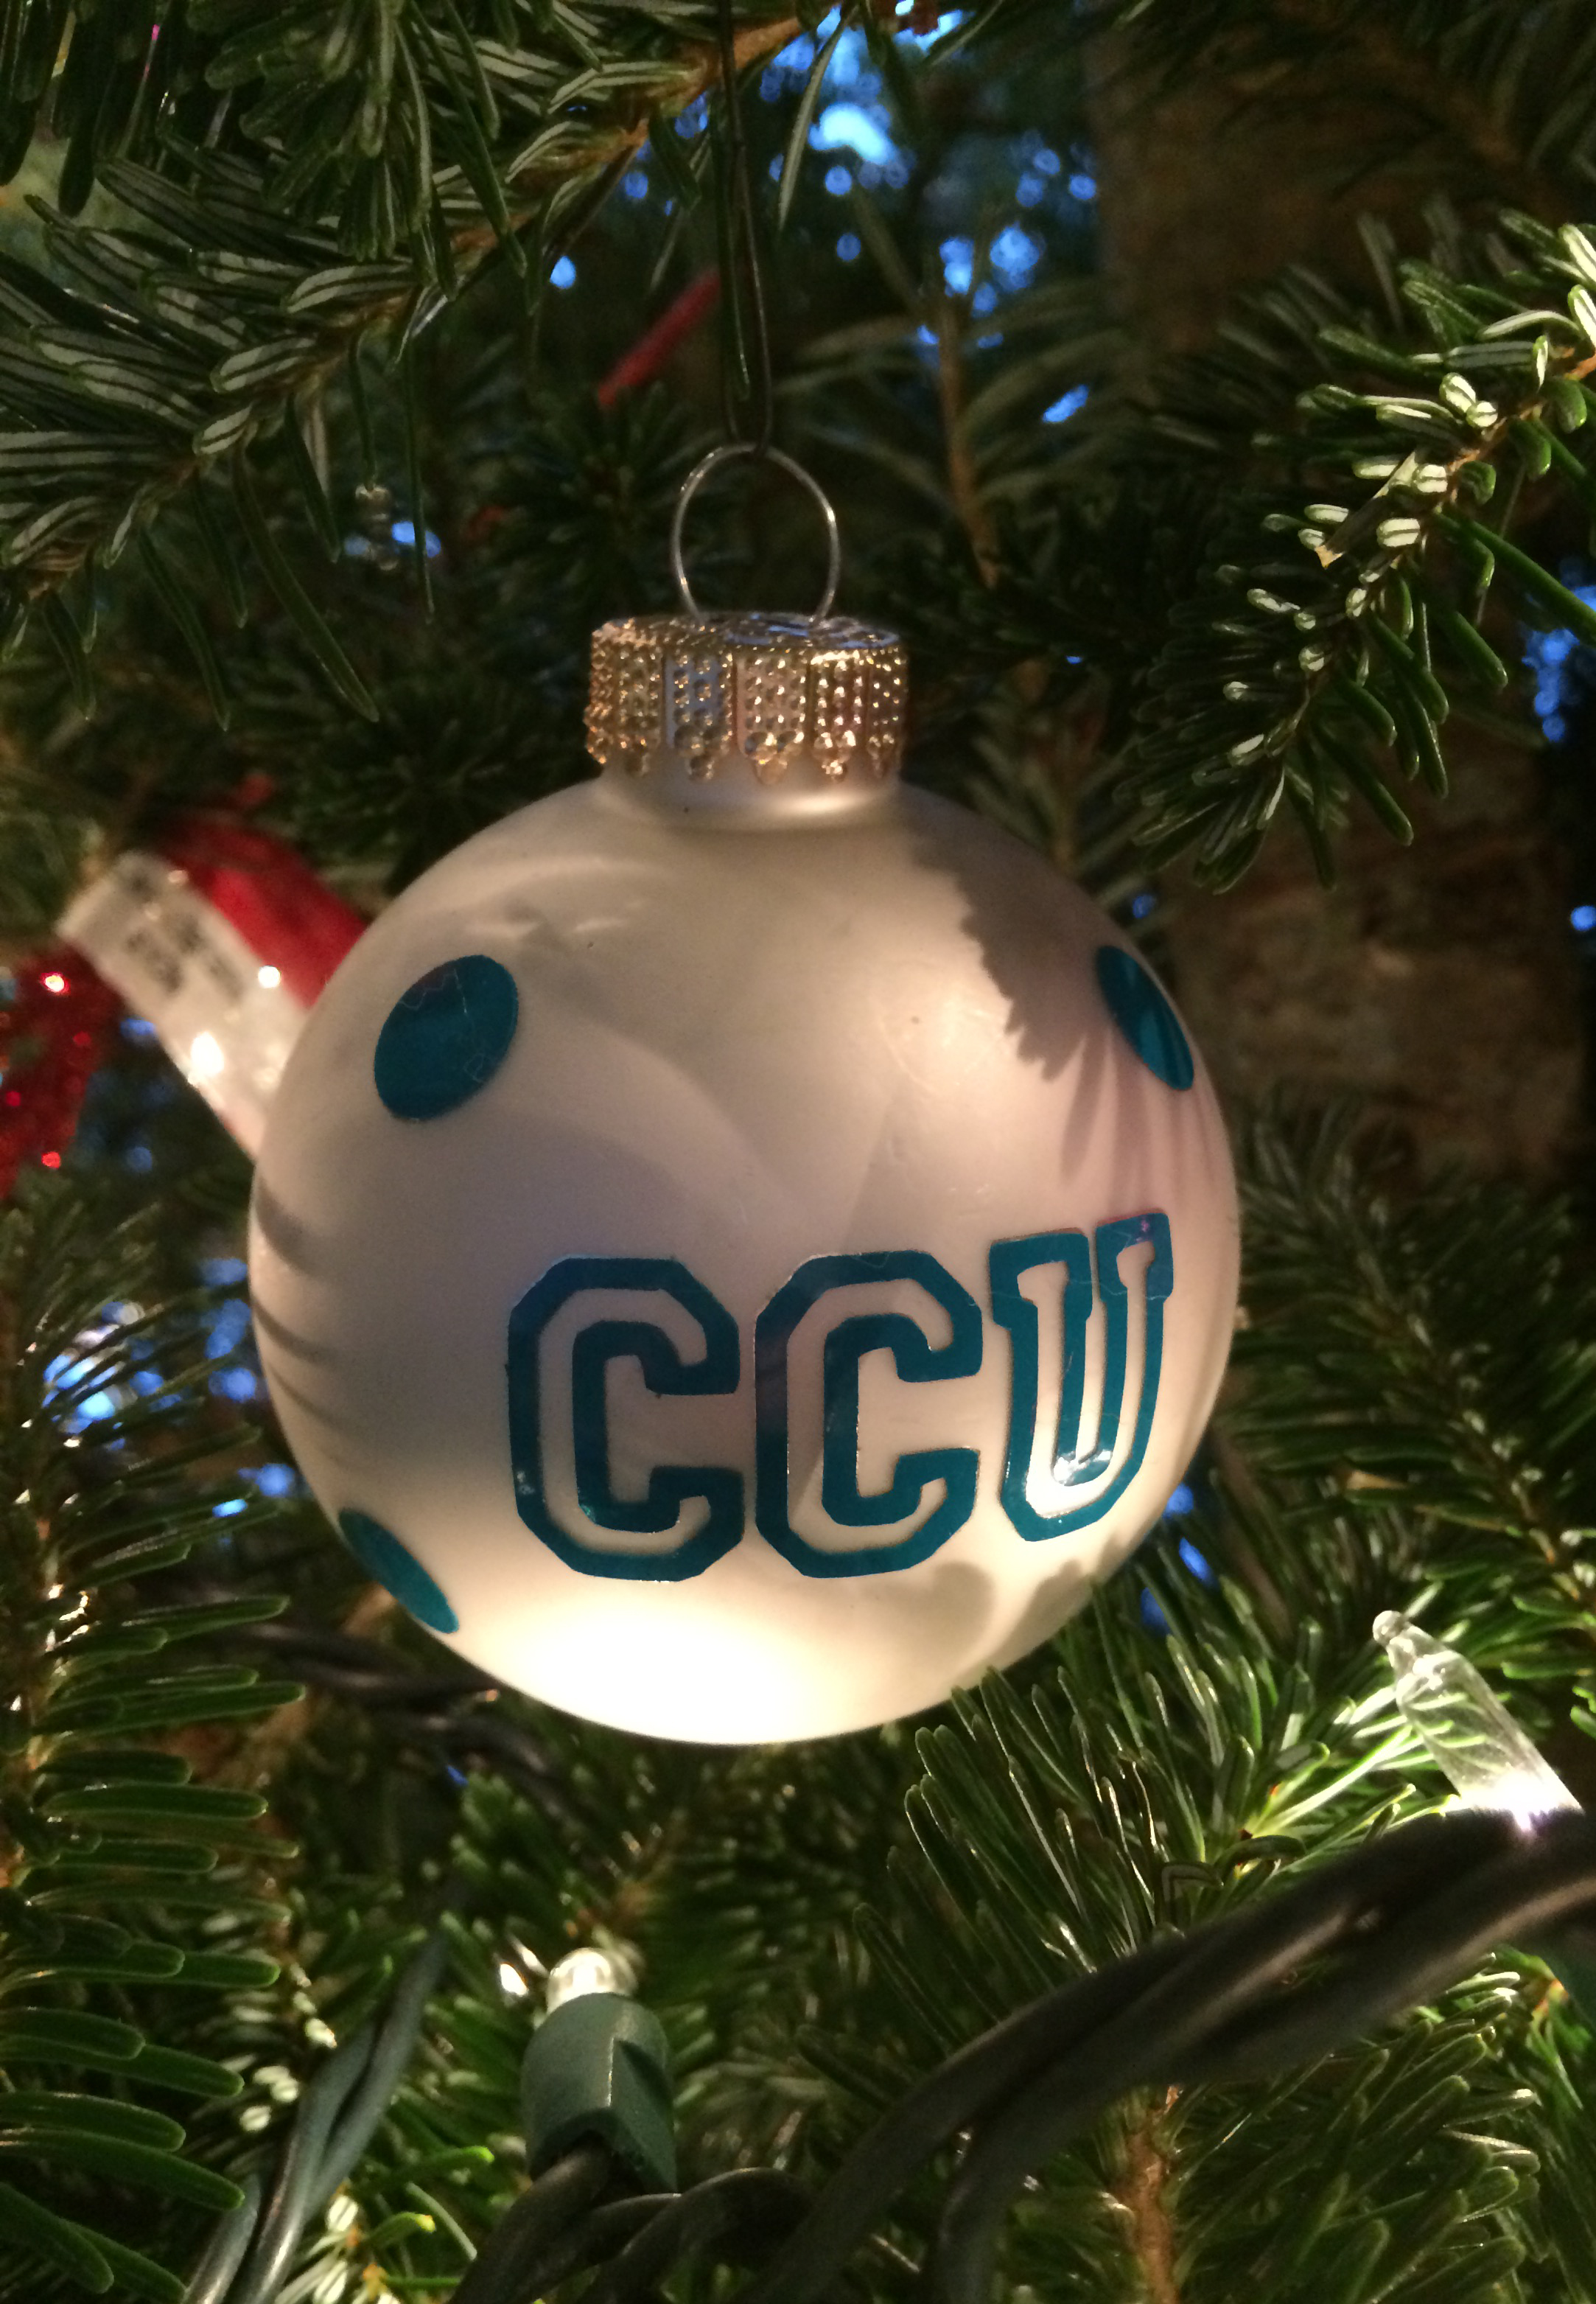 It is a no-brainer that we have included a Coastal Caorlina University ornament on our tree.